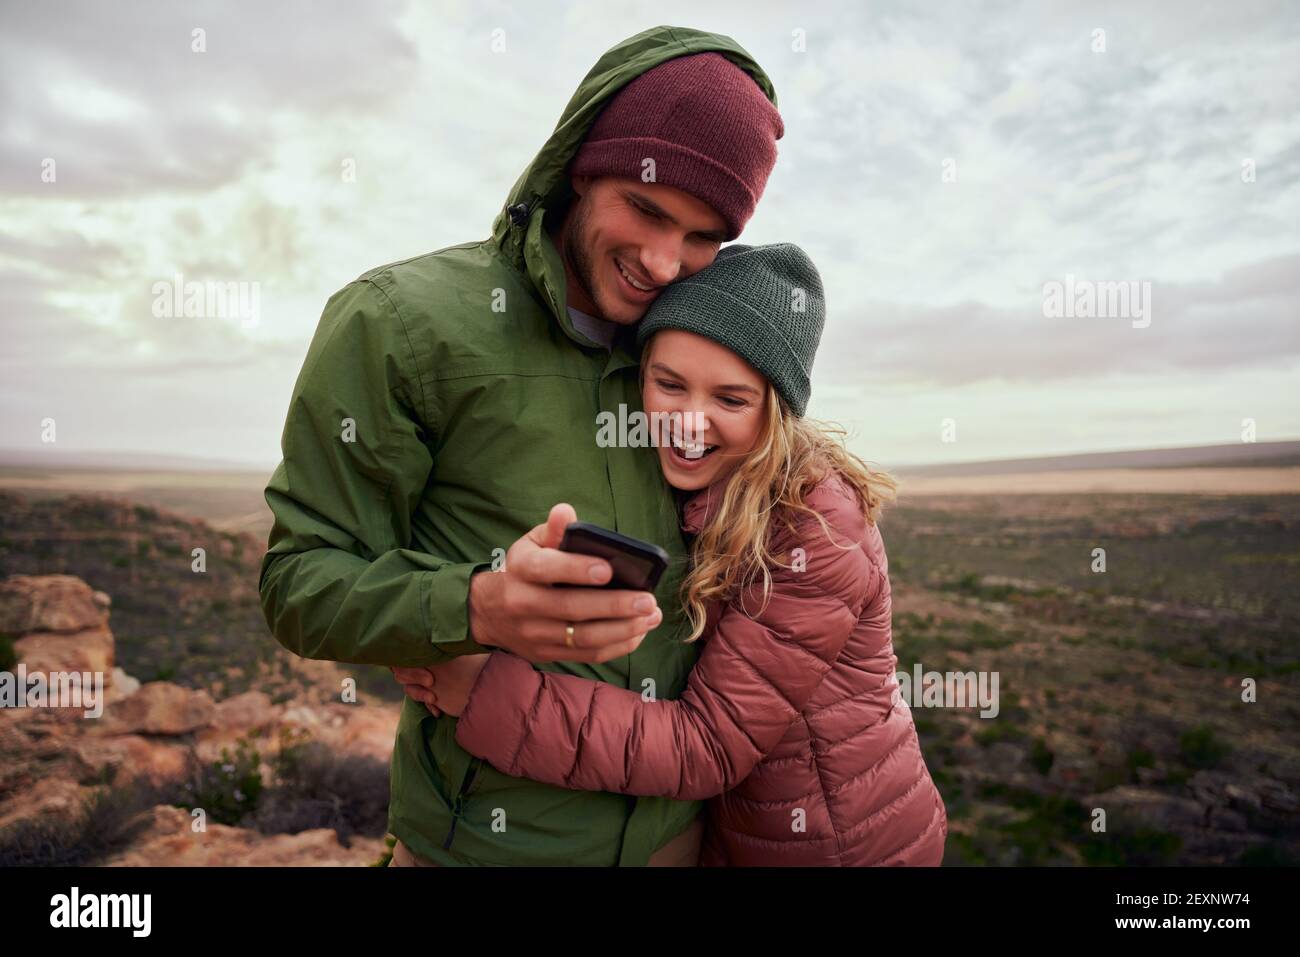 Laughing young couple embracing during camp on mountains looking at smartphone in winter clothing Stock Photo